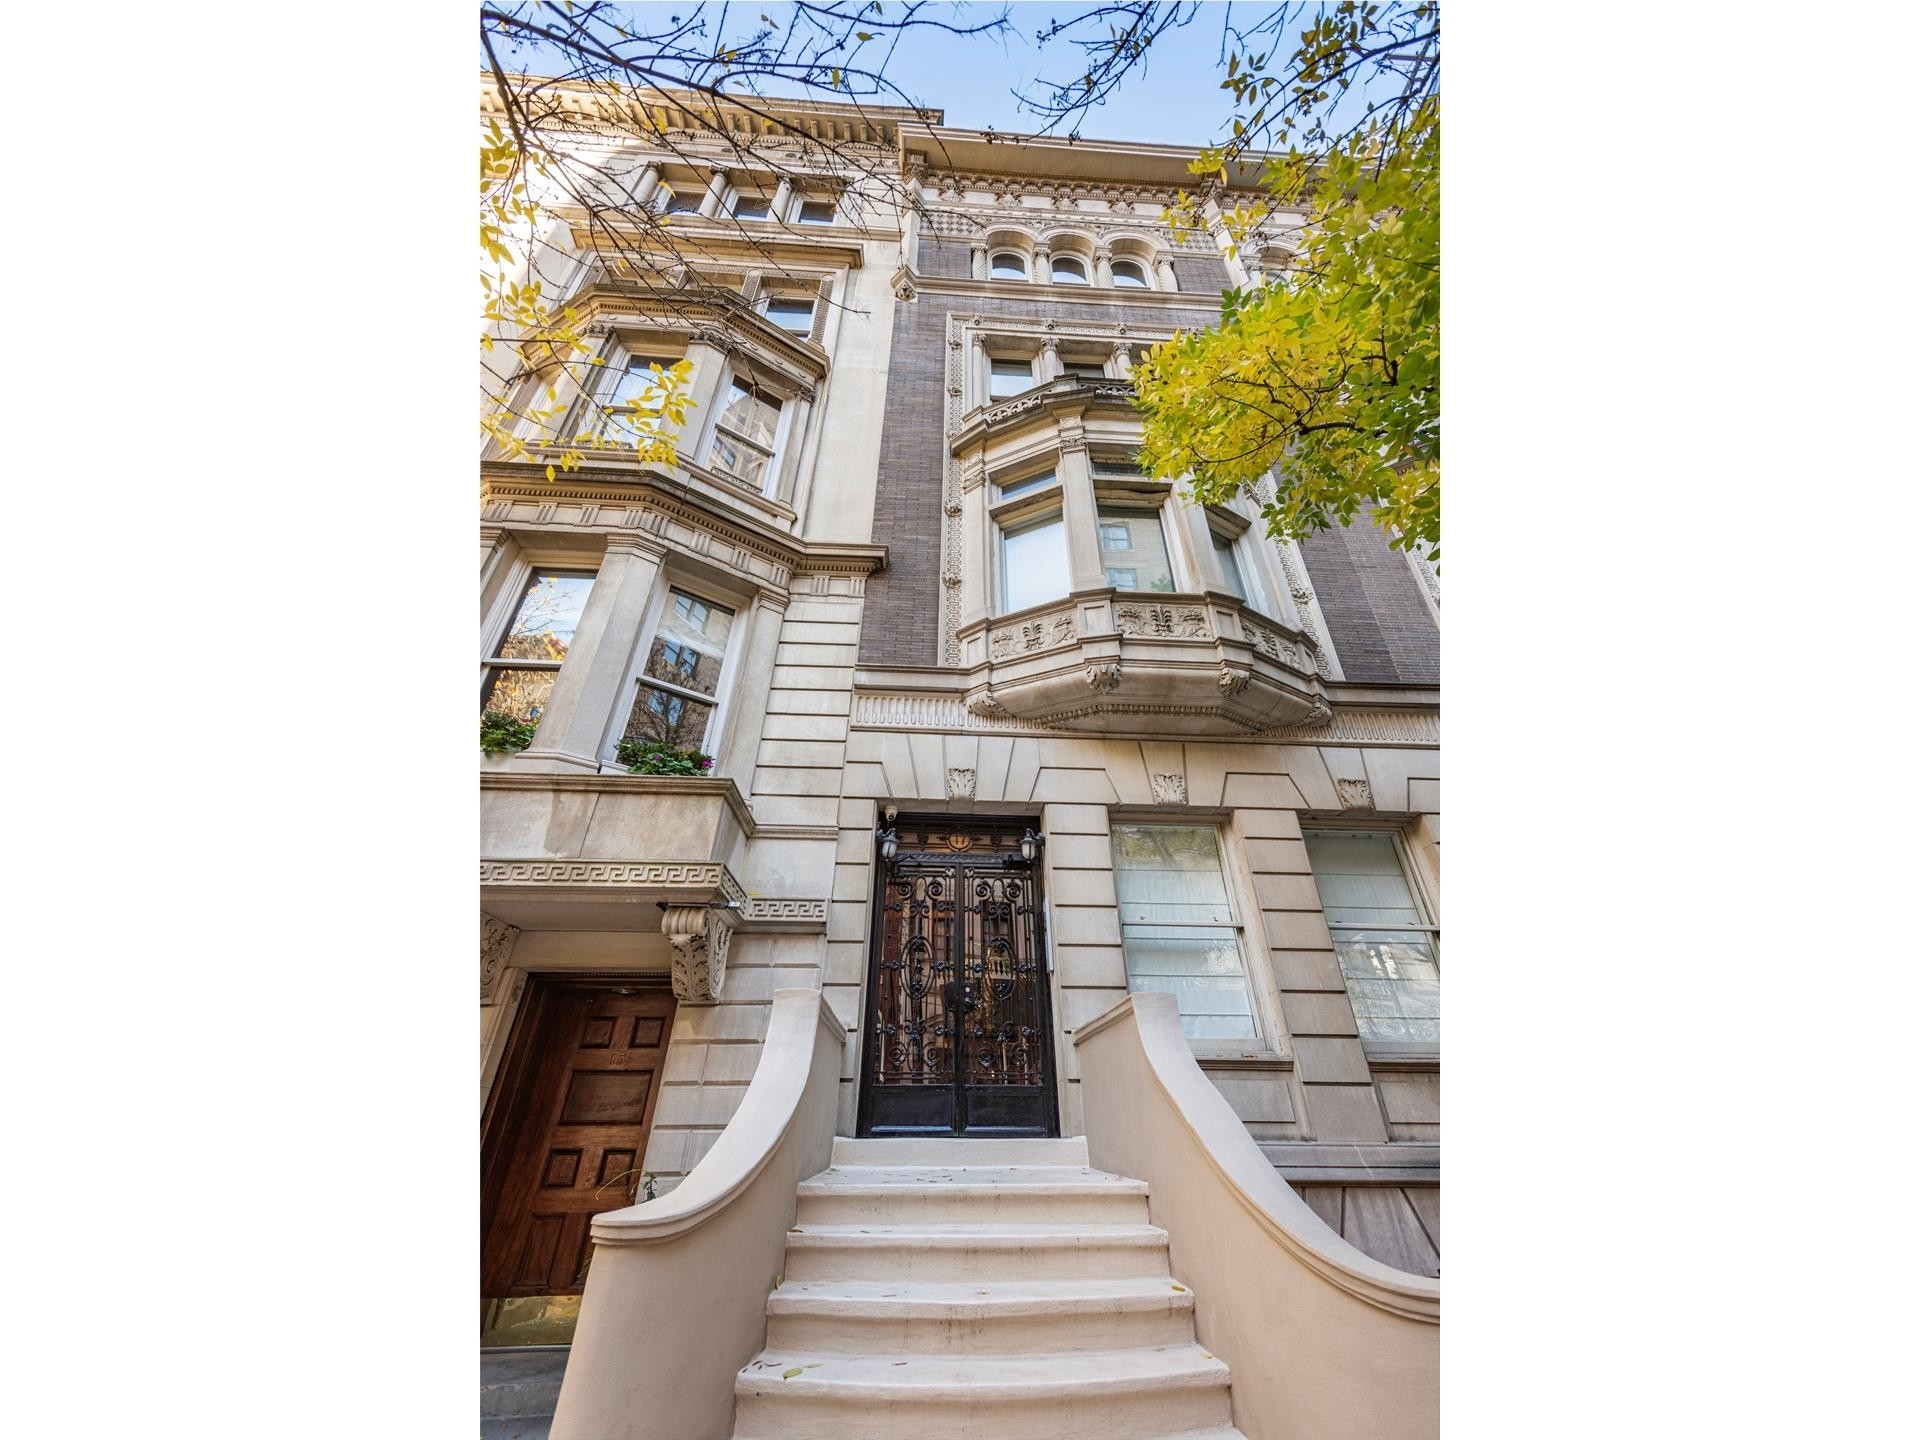 4. Multi Family Townhouse for Sale at 17 E 76TH ST, TOWNHOUSE Lenox Hill, New York, NY 10021